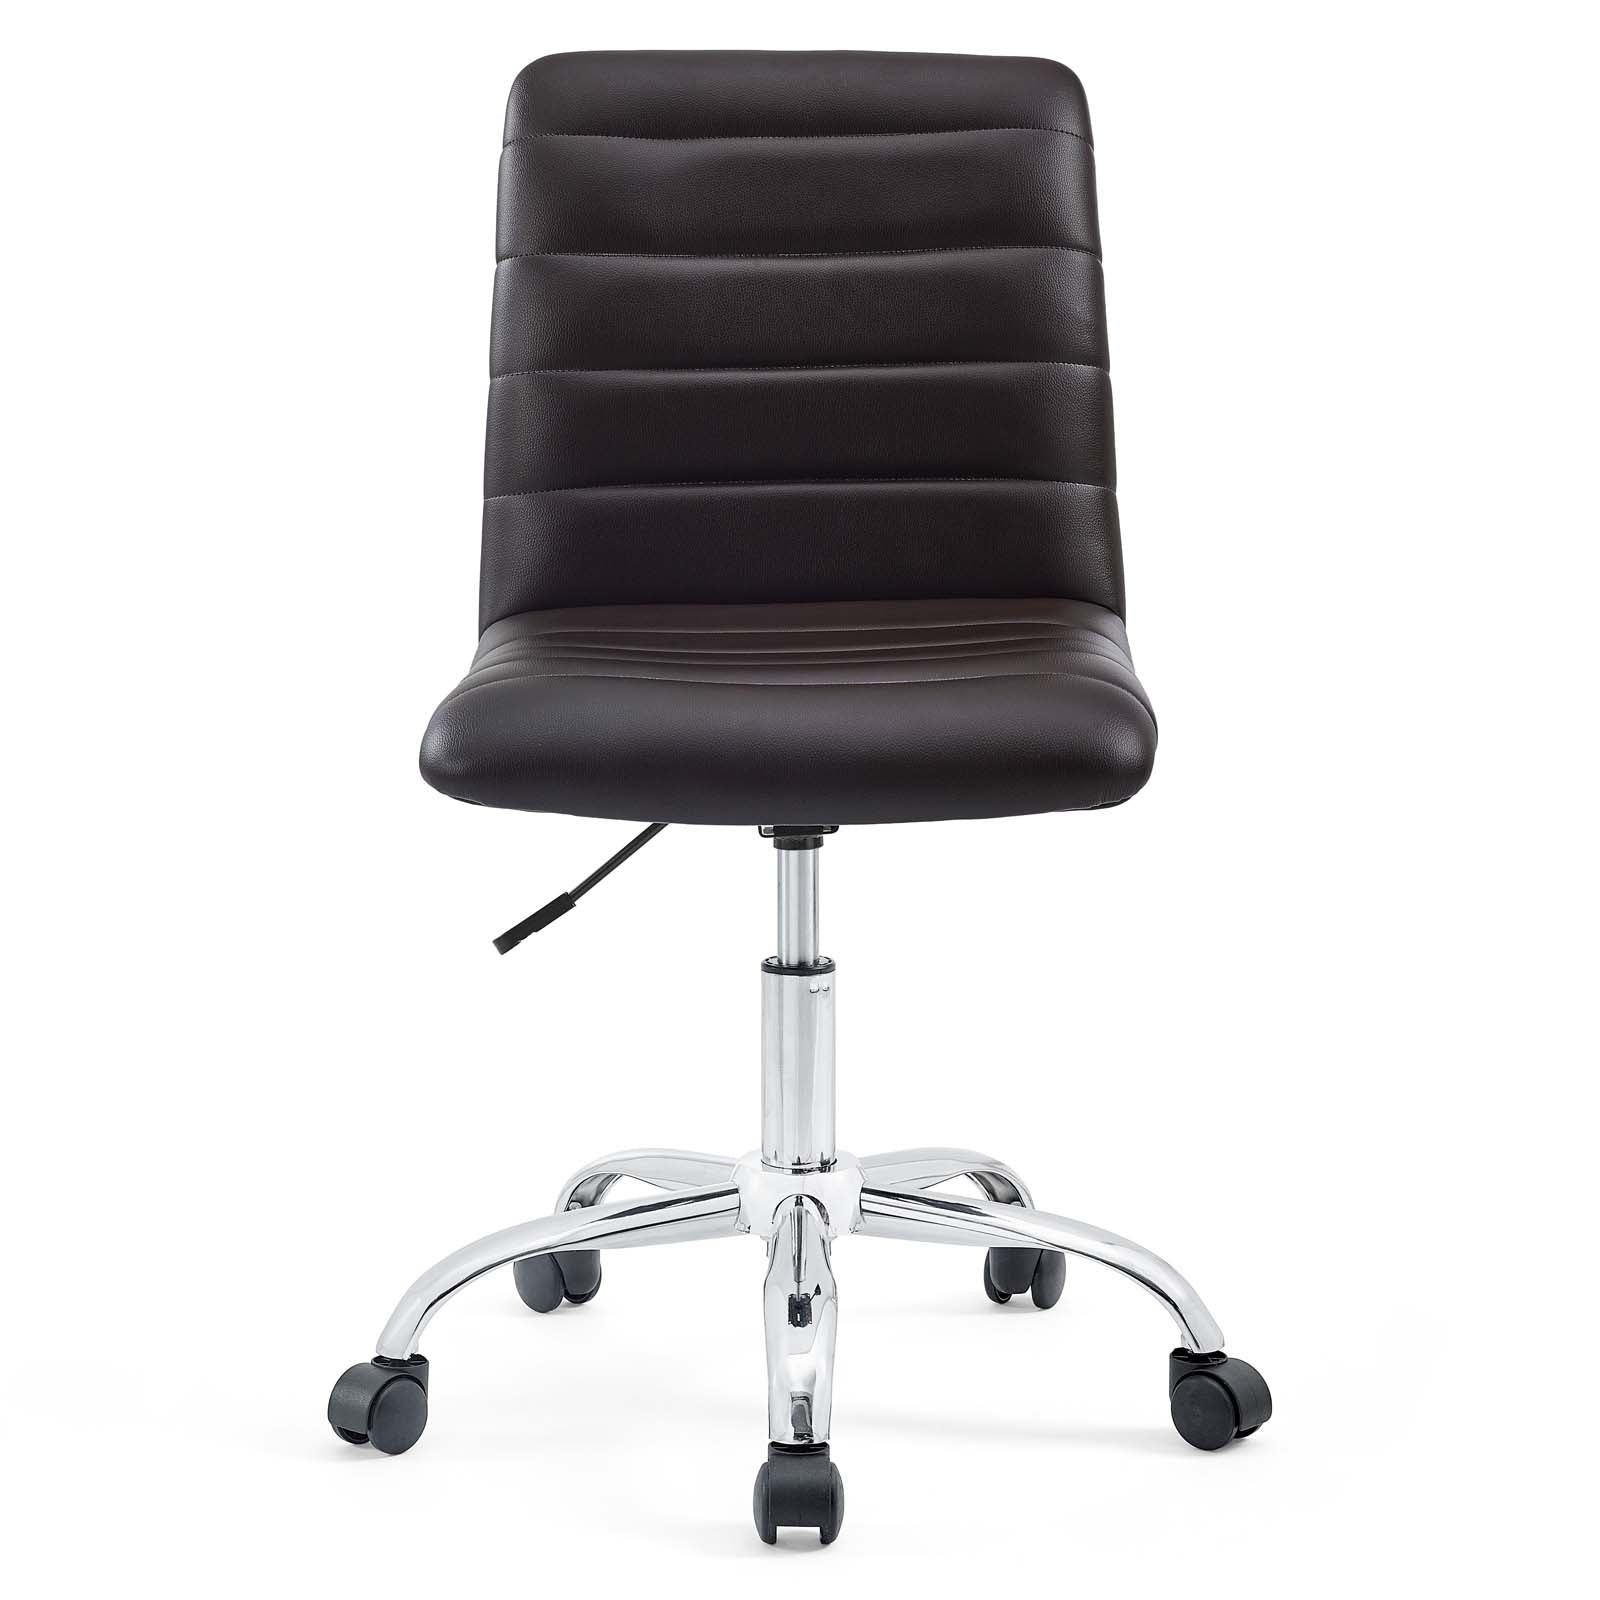 Modway Task Chairs - Ripple Armless Mid Back Vinyl Office Chair Brown